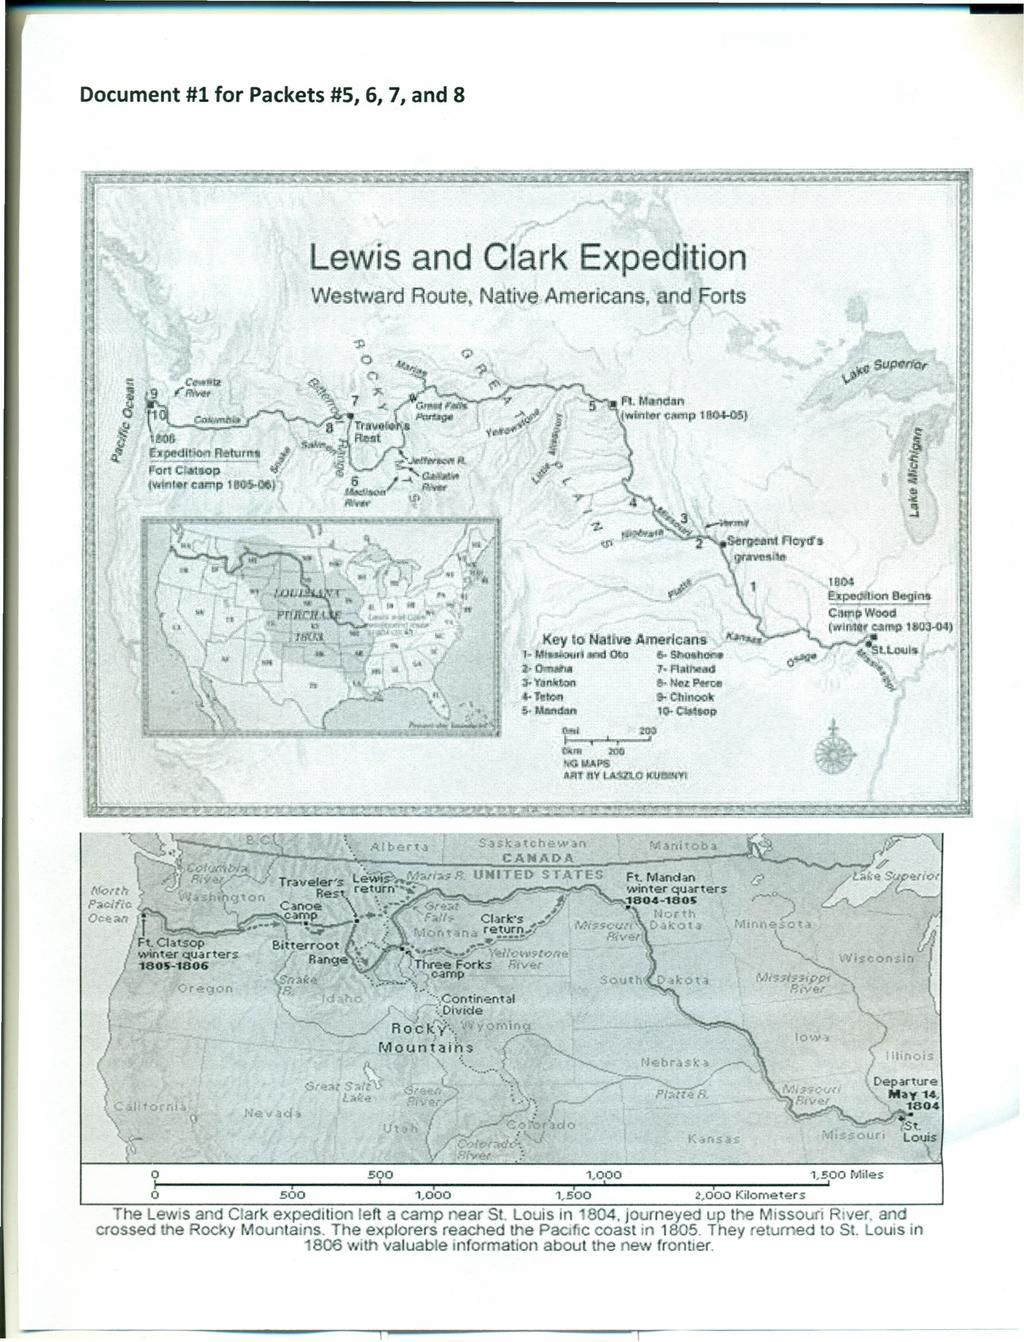 Document #1 for Packets #5,6, 7, and 8 Lewis and Clark Expedition Wes 'JardRoute N ive A, rie ns, Forts j.j l (.«uth P,,(:ific OceiiUl o 6 590 1.0.00 1.5,00Miles 560 1.oho 1.doo 2.